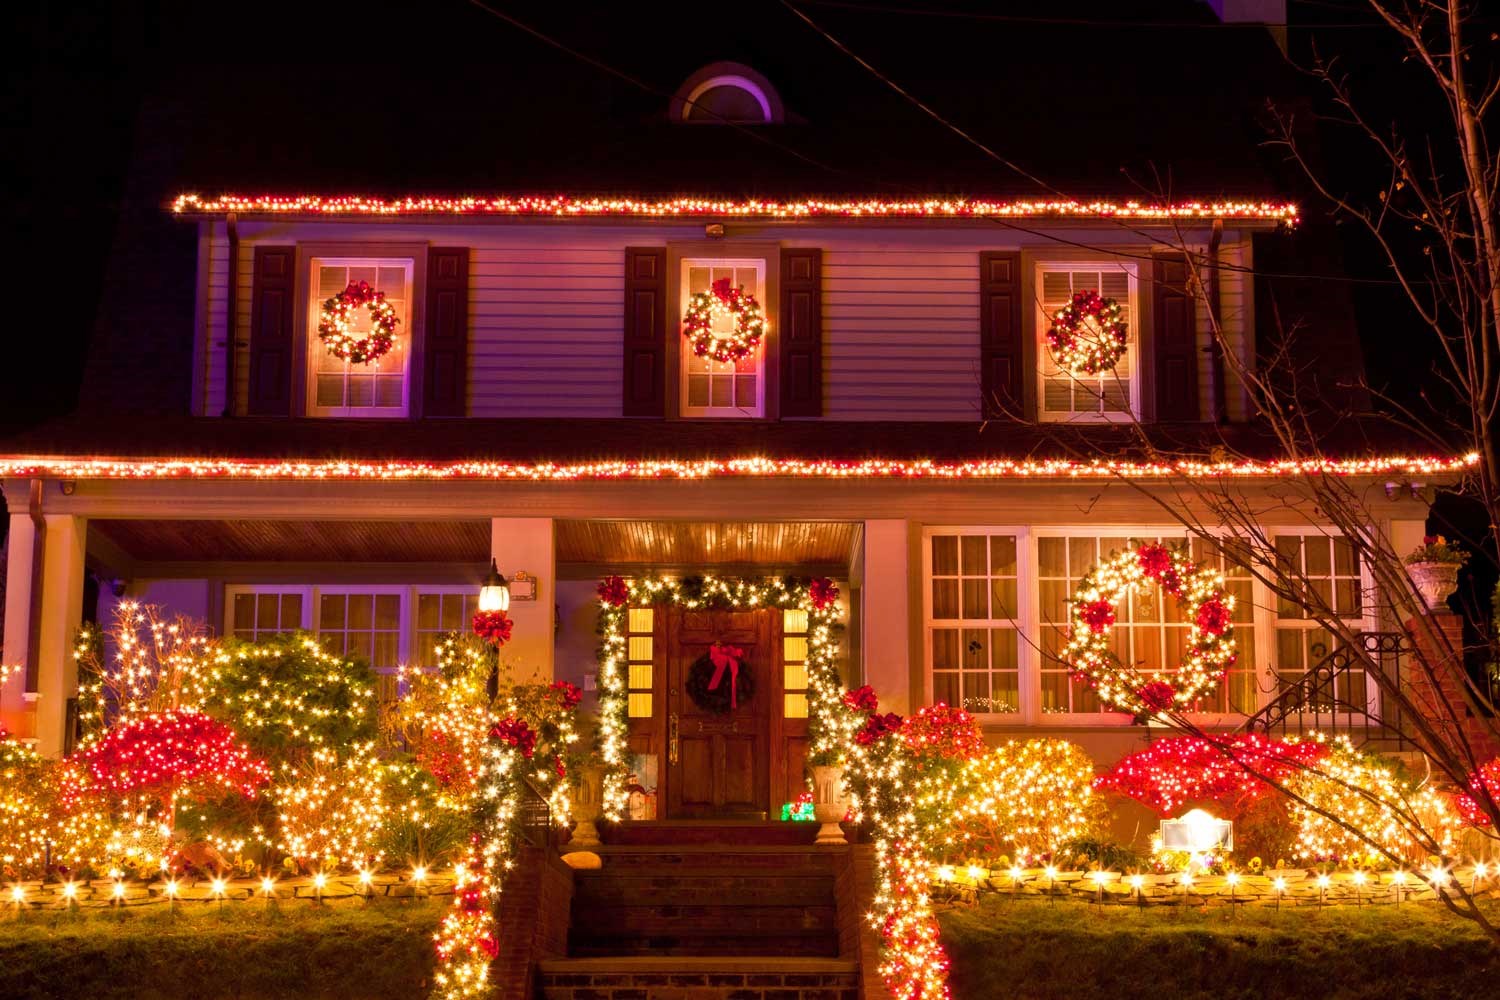 12 ways to decorate your home with Christmas lights | Better Homes and ...